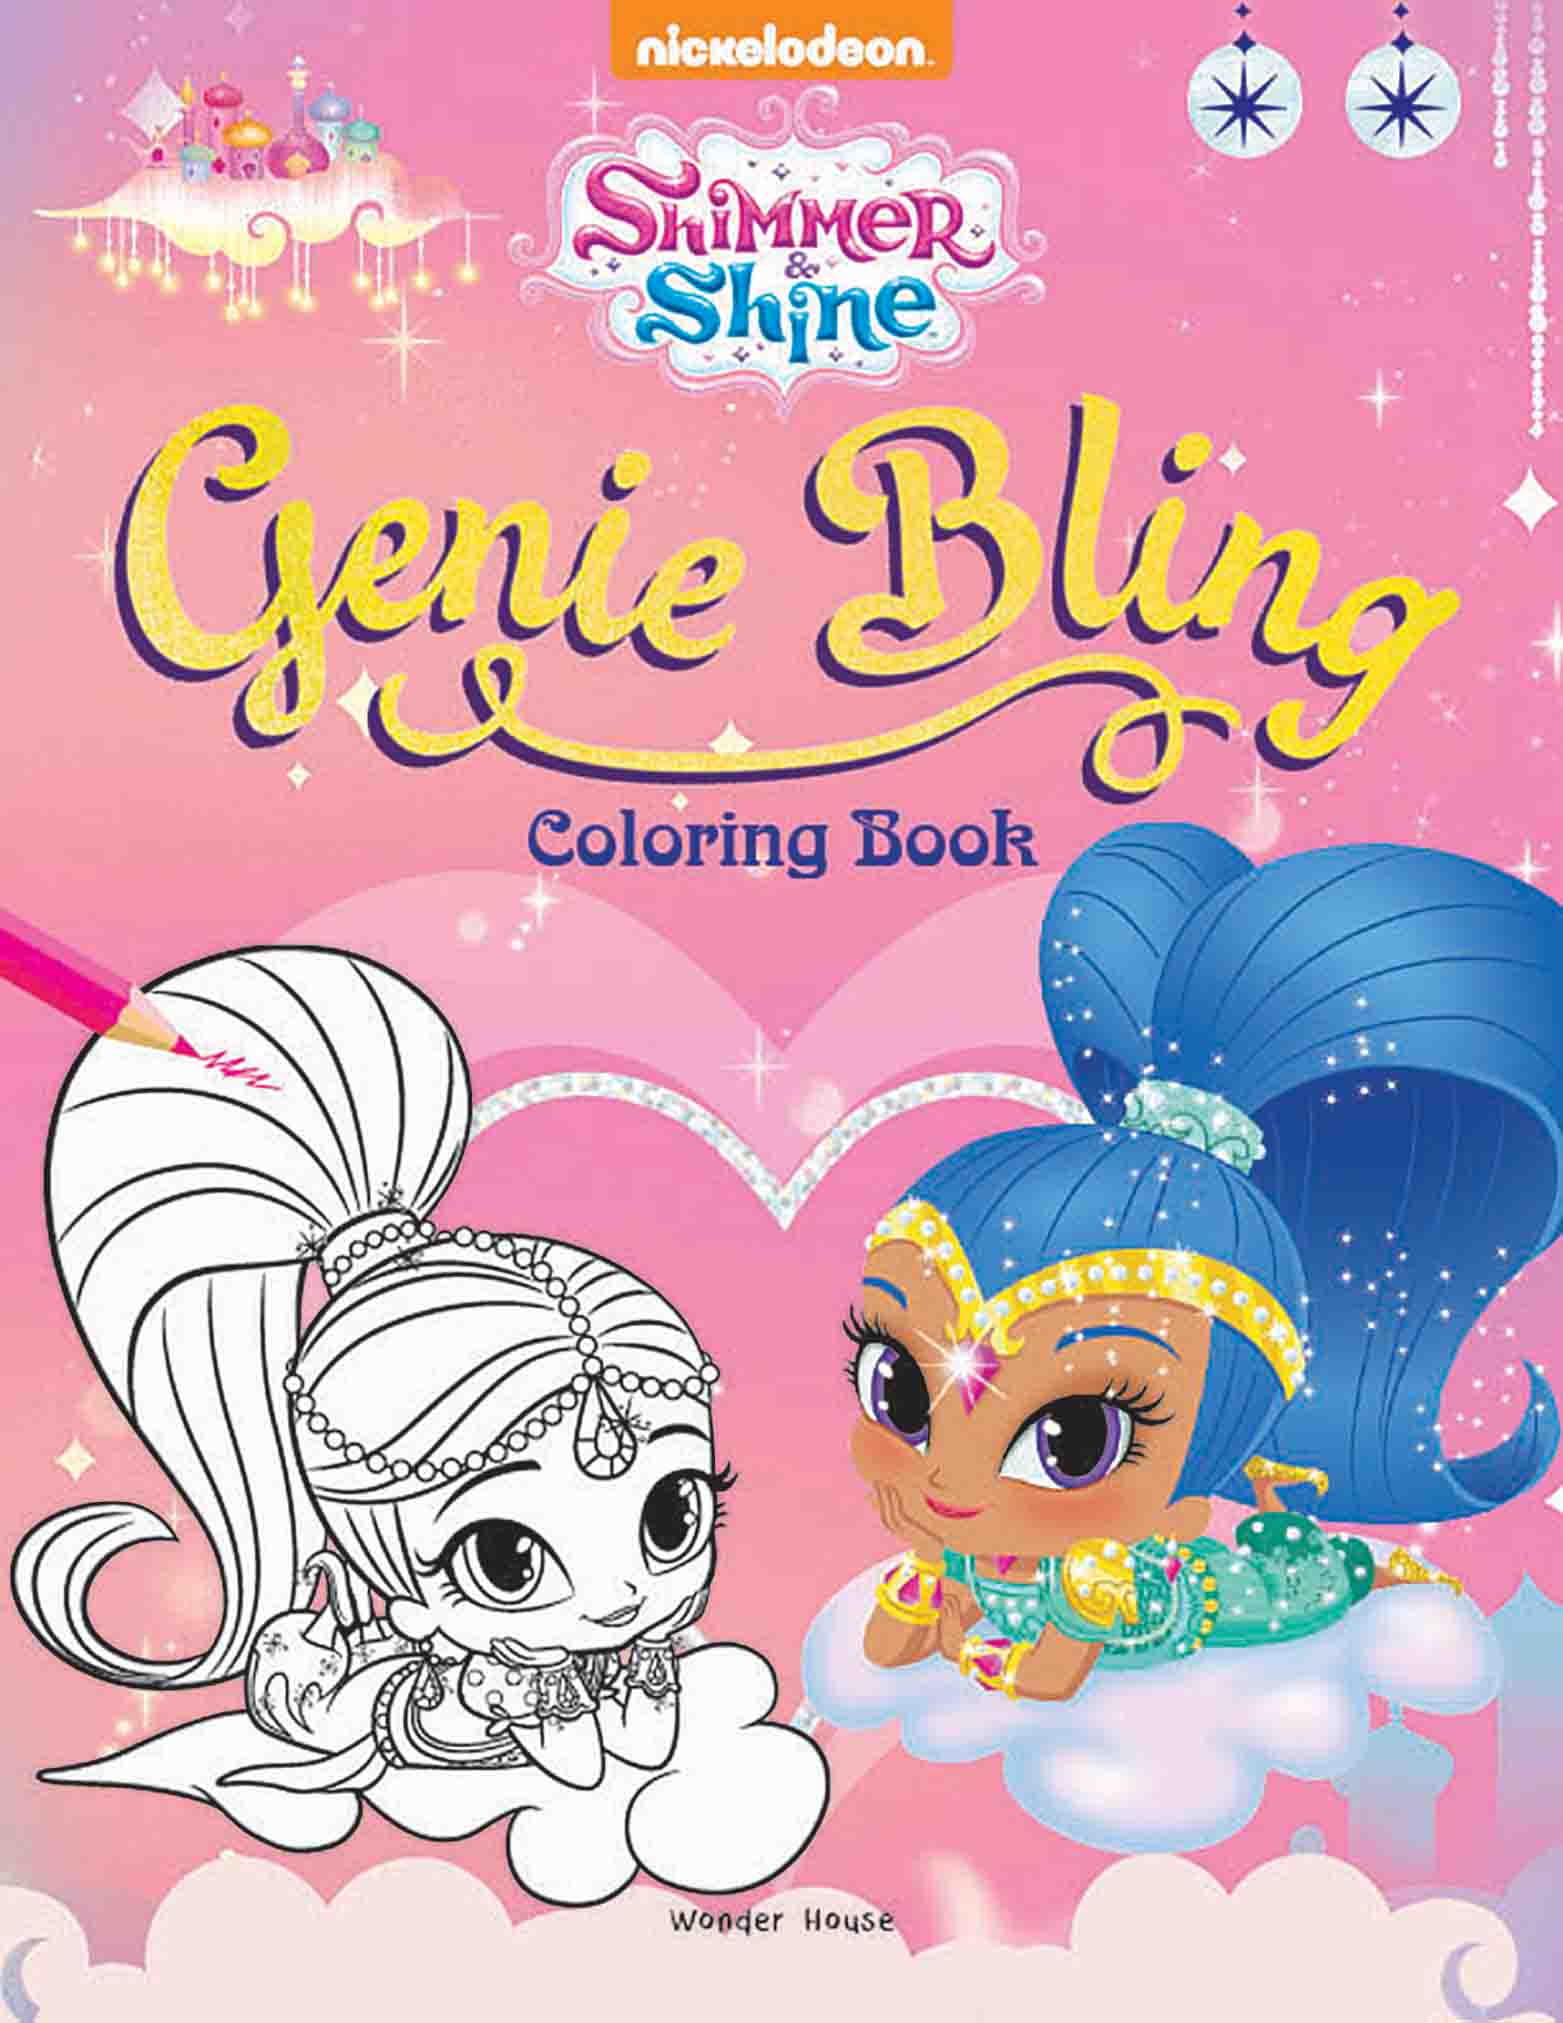 Genie Bling: Coloring Book for Kids (Shimmer & Shine)